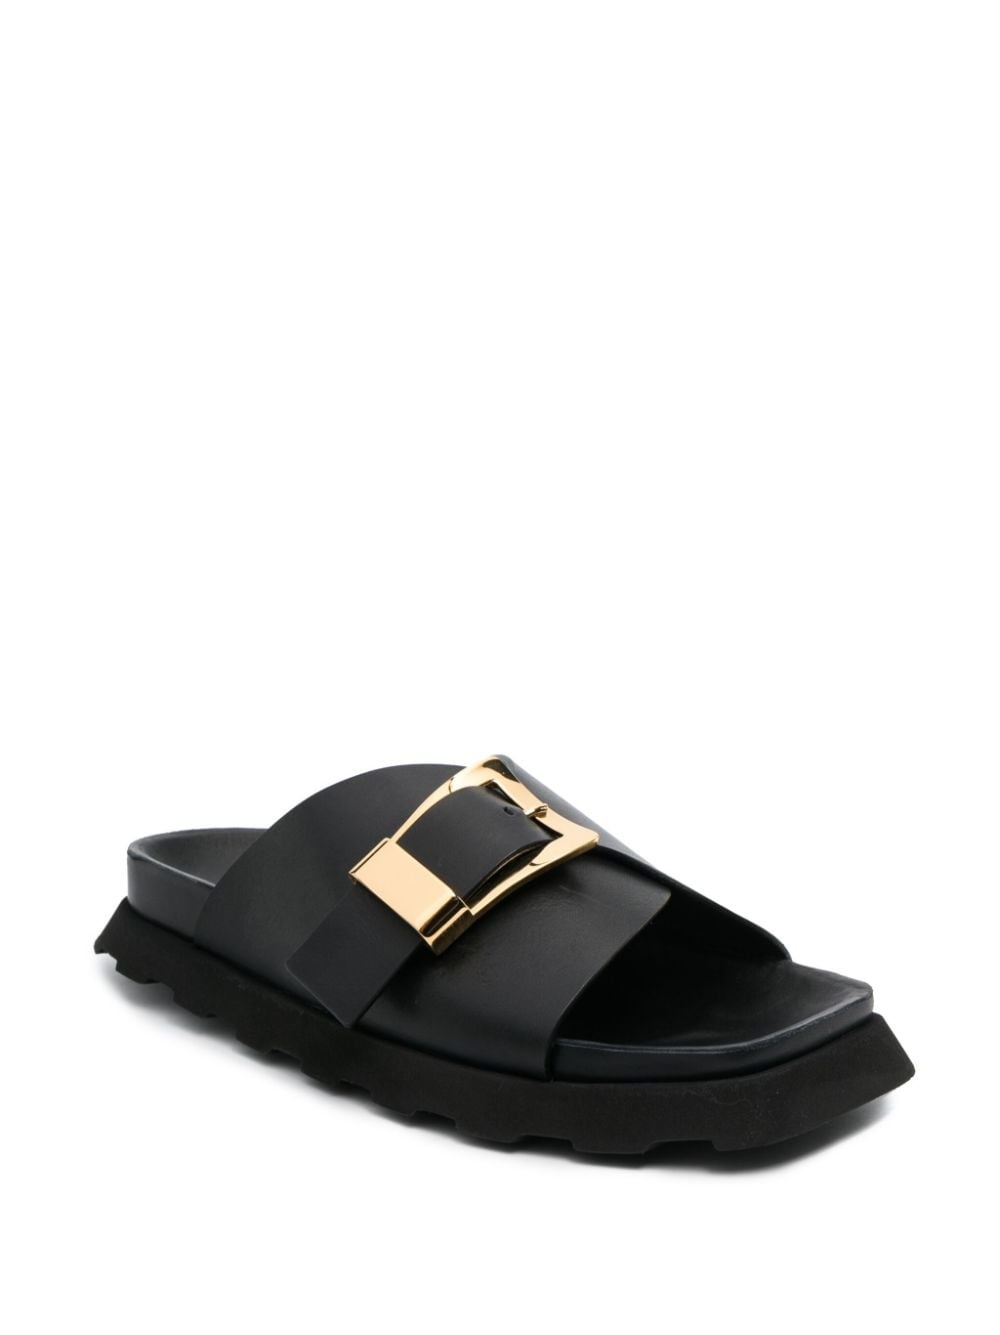 buckled leather sandals - 2